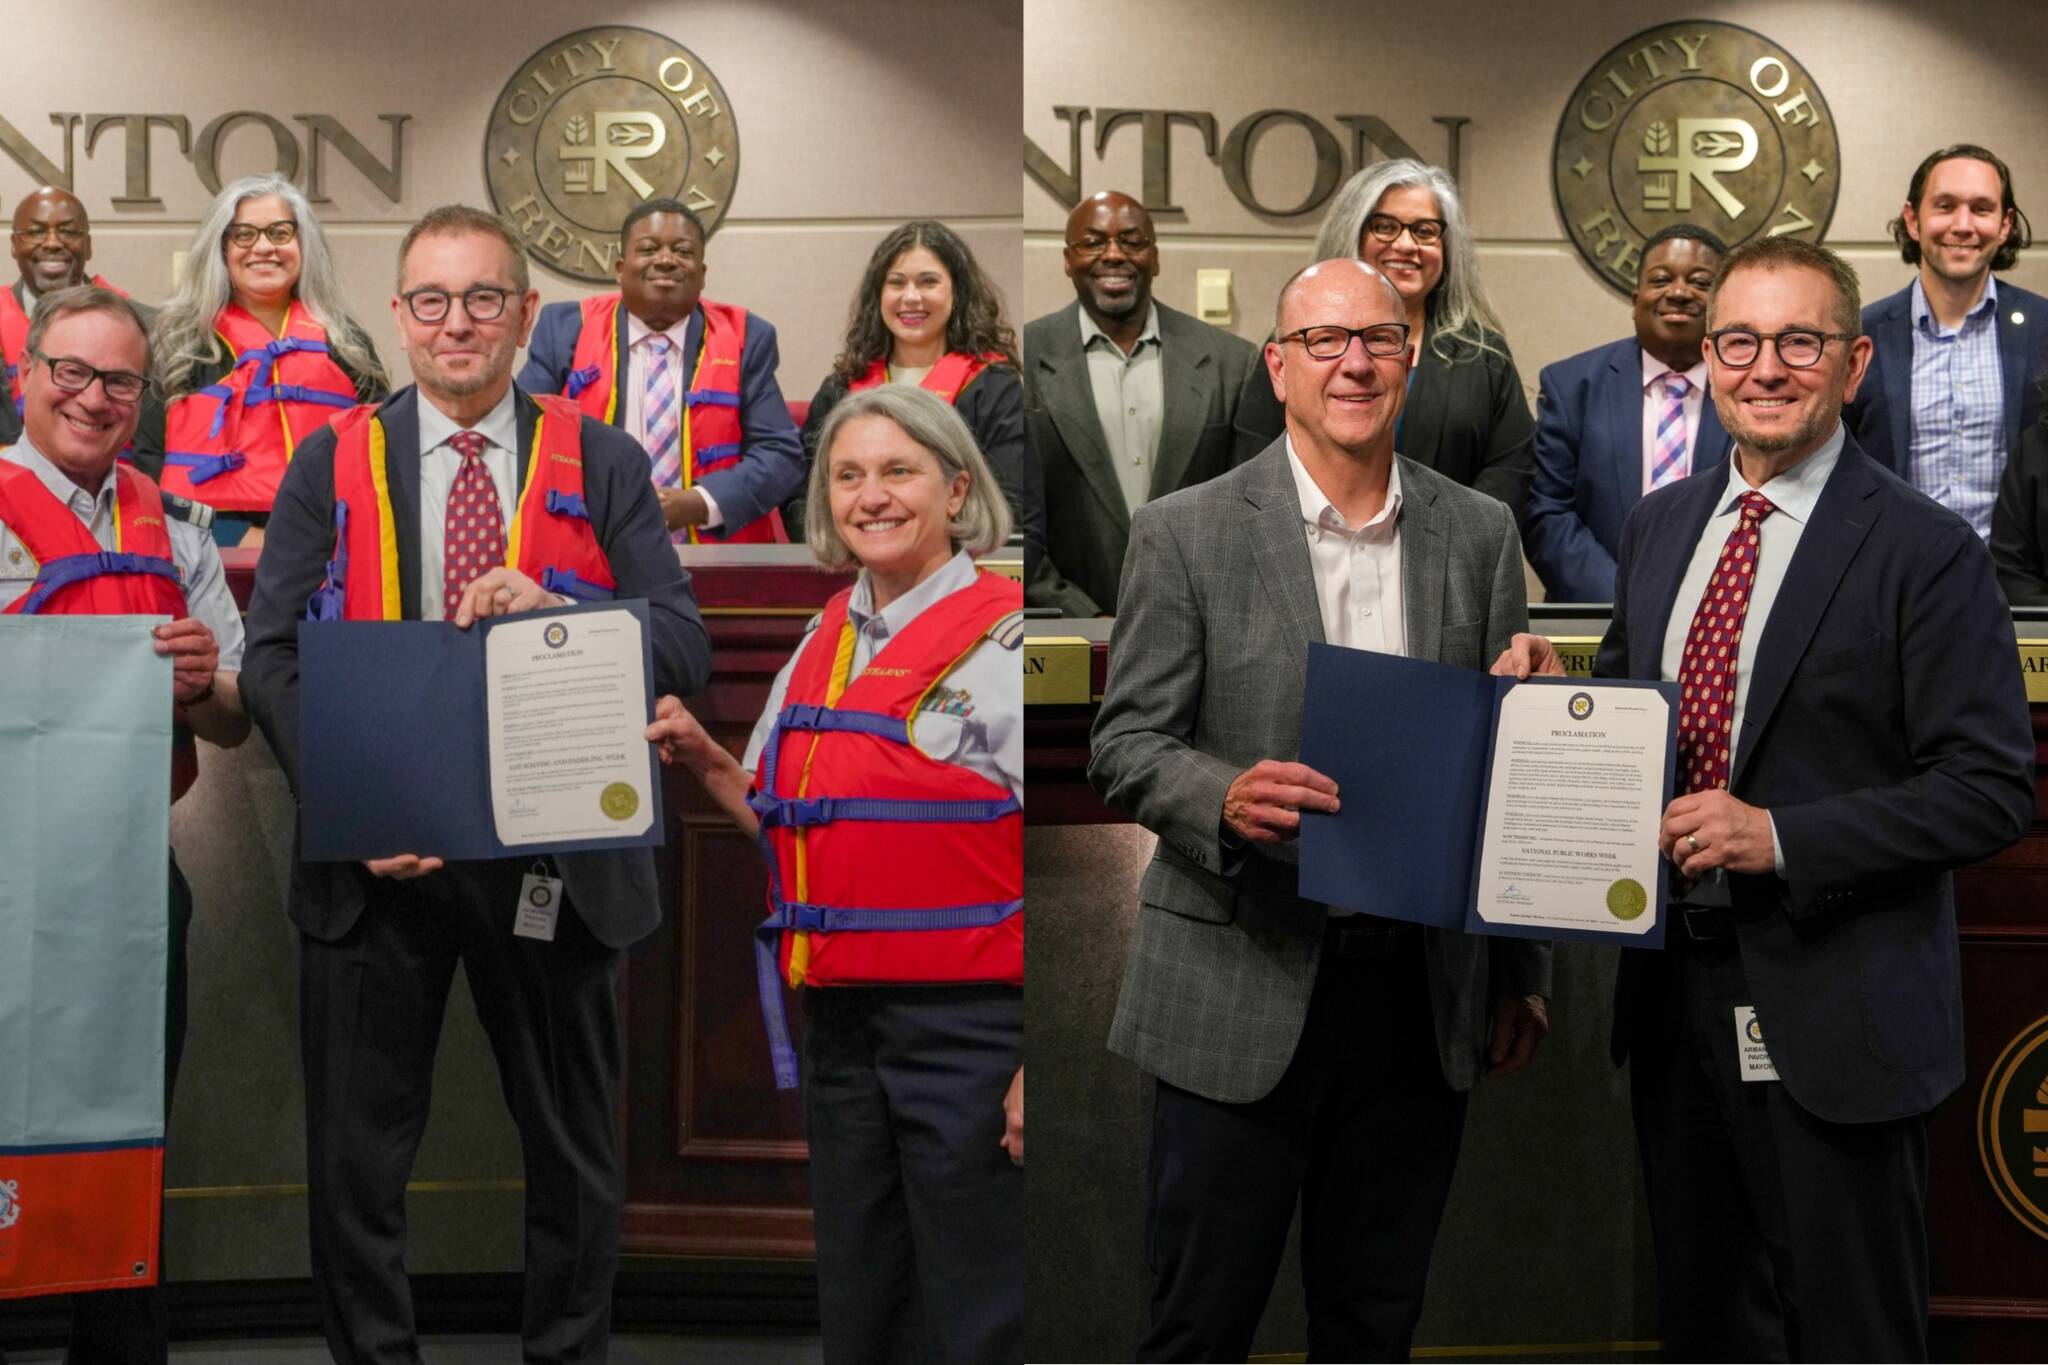 Photos from both proclamations at the Renton City Council meeting on May 13. Photo courtesy of the City of Renton